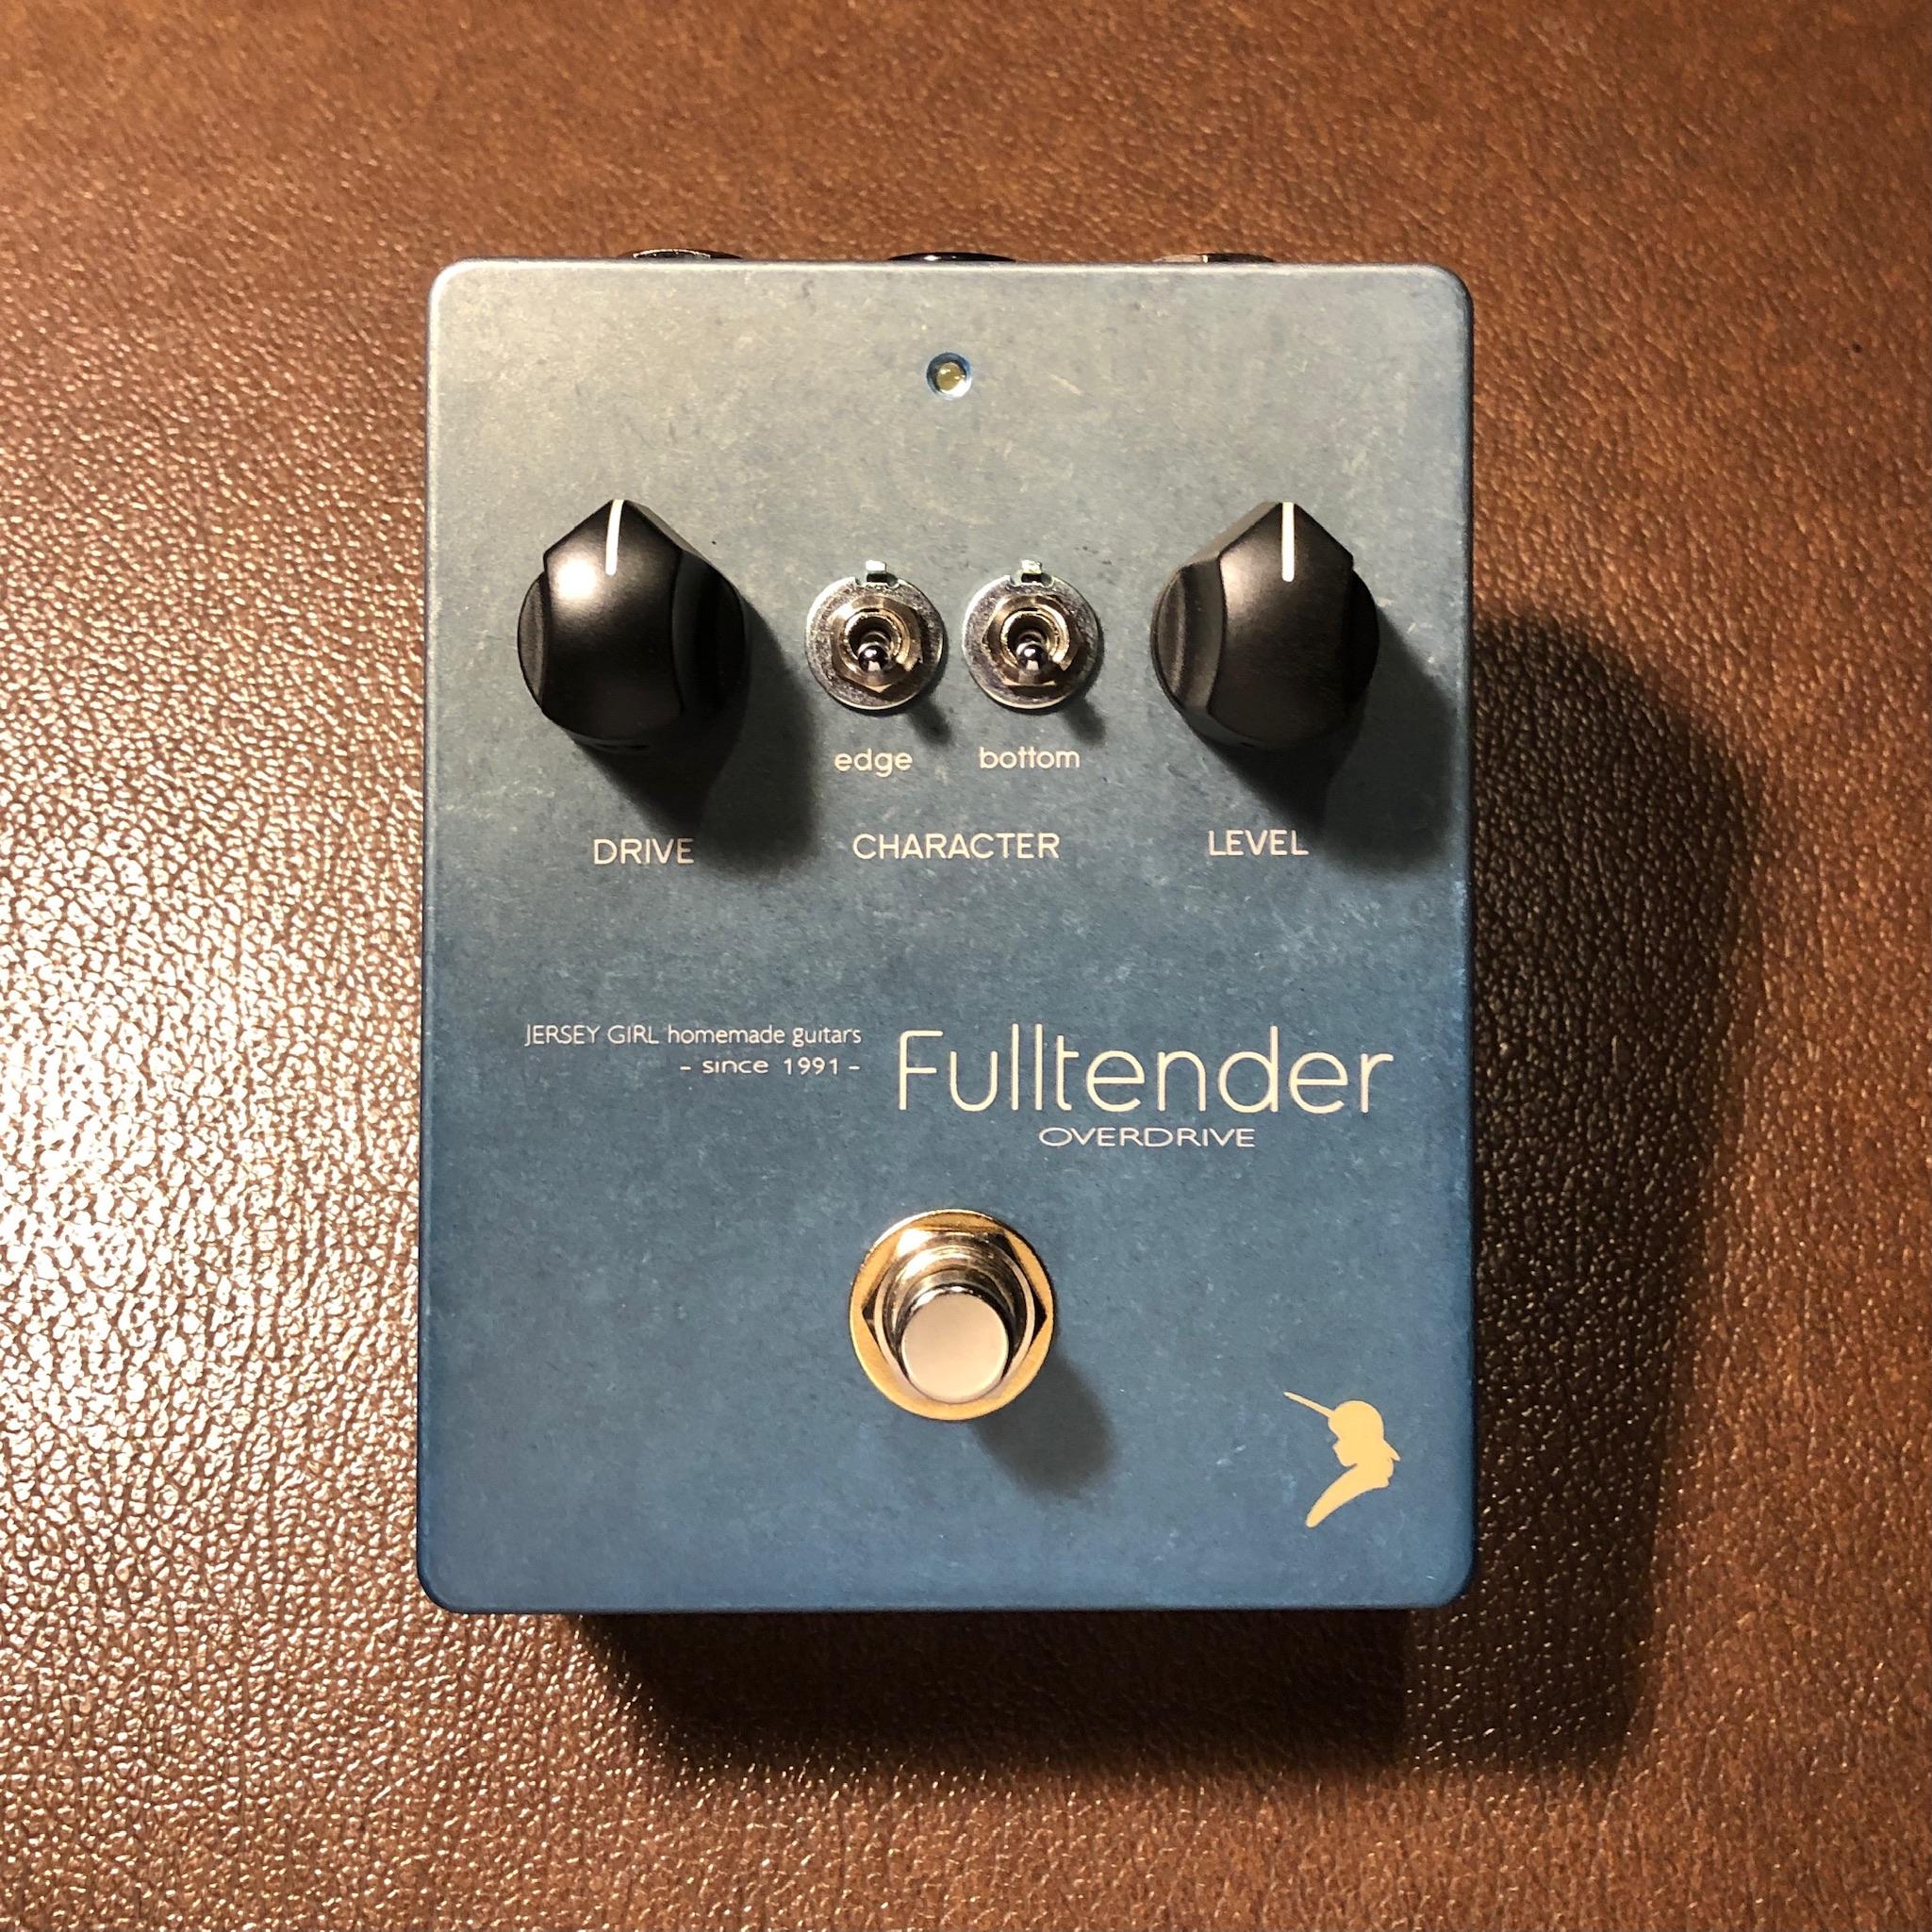 Jersey Girl Homemade Guitars FullTender Overdrive | Axe... And You Shall  Receive